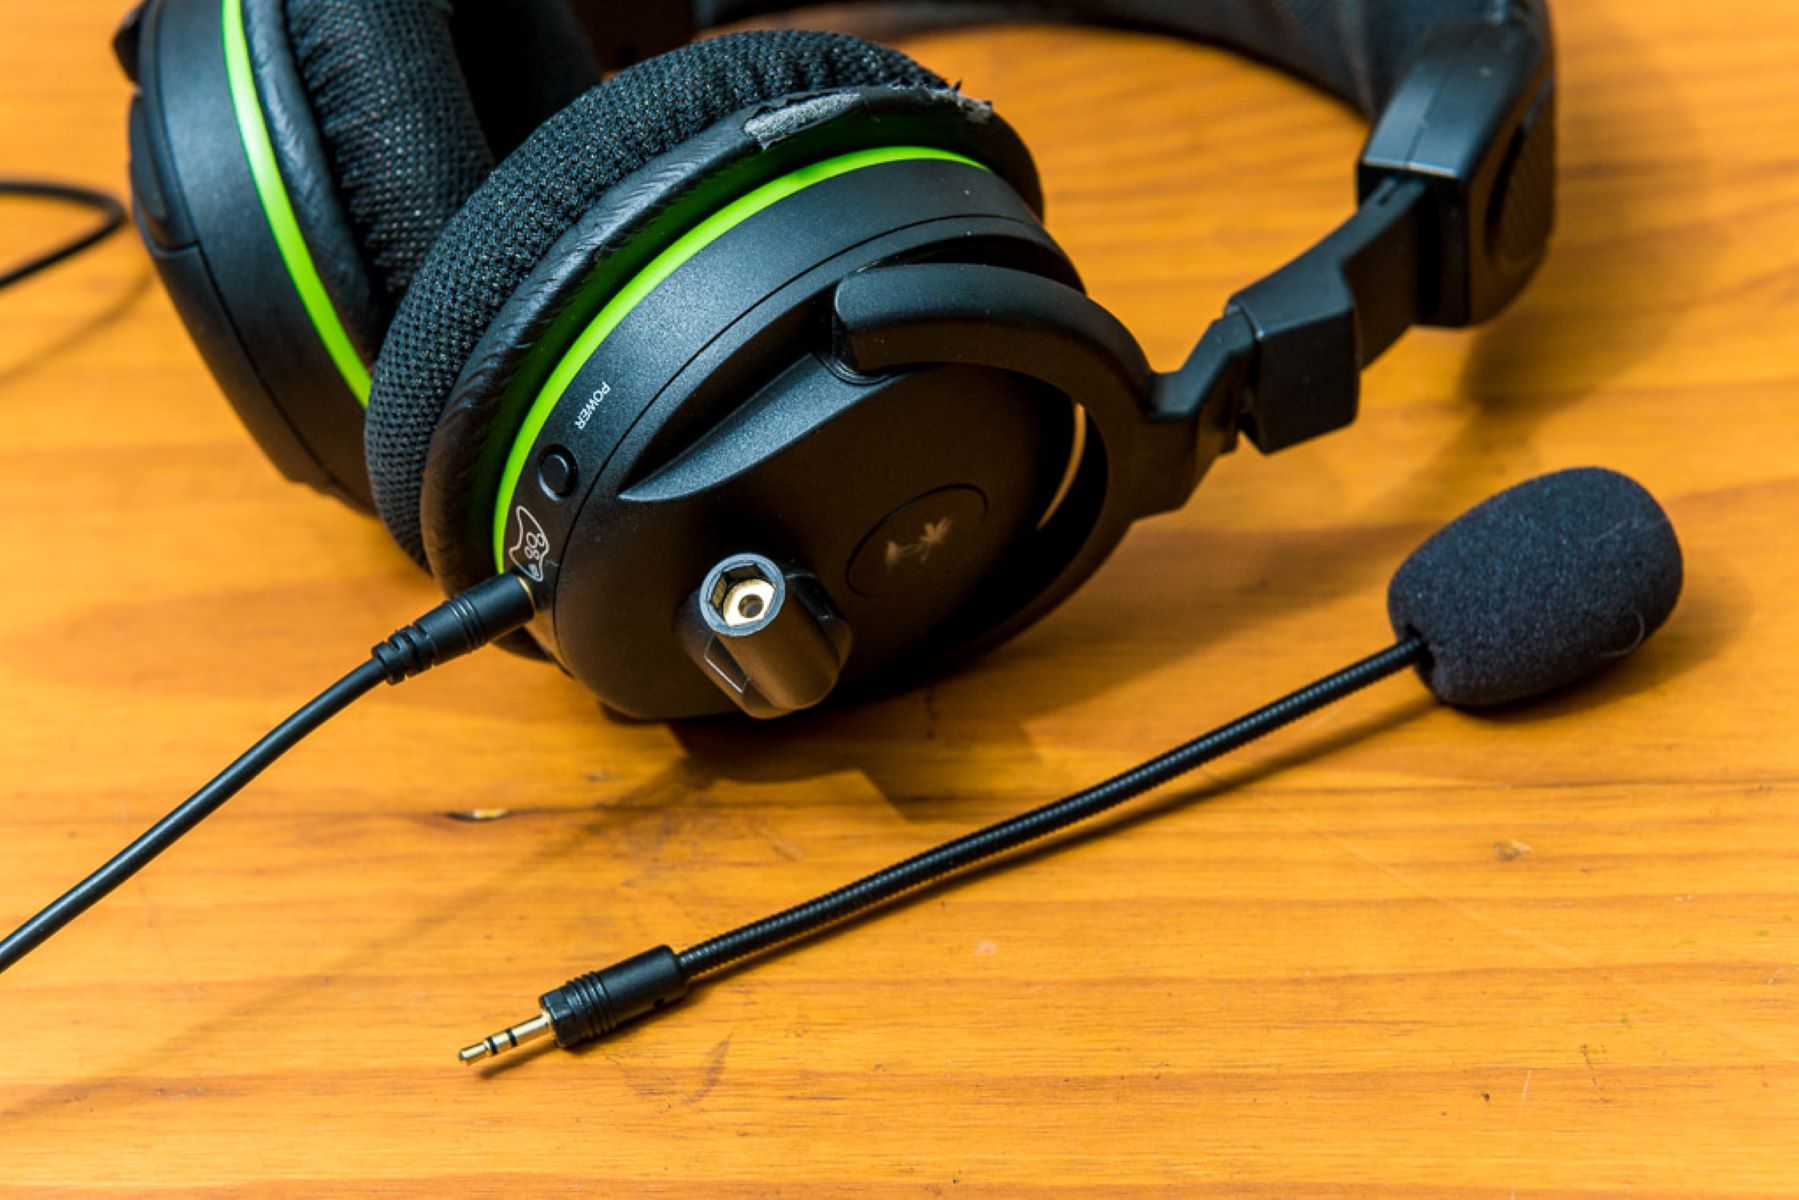 Troubleshooting Turtle Beach Headset Mic Problems